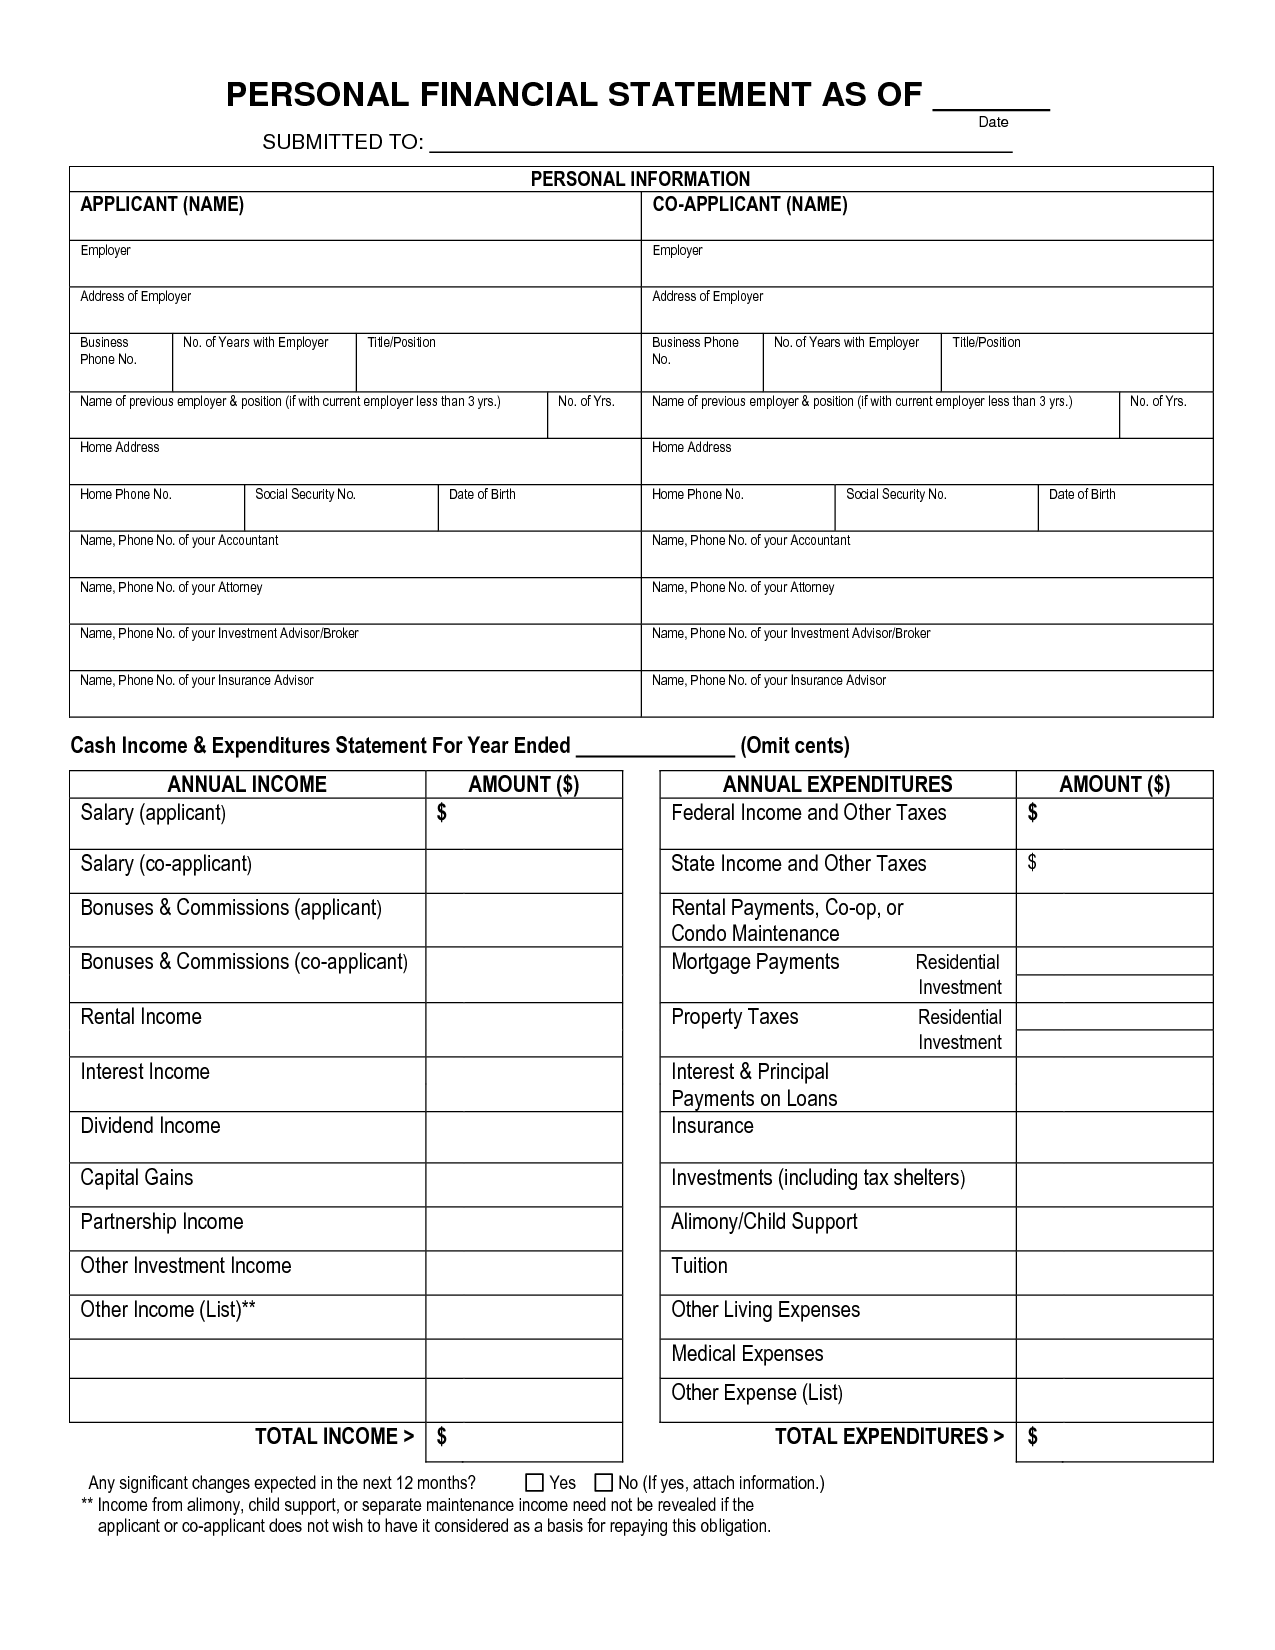 Personal Personal Financial Statement Template Excel Intended For Personal Financial Statement Template Excel For Google Spreadsheet